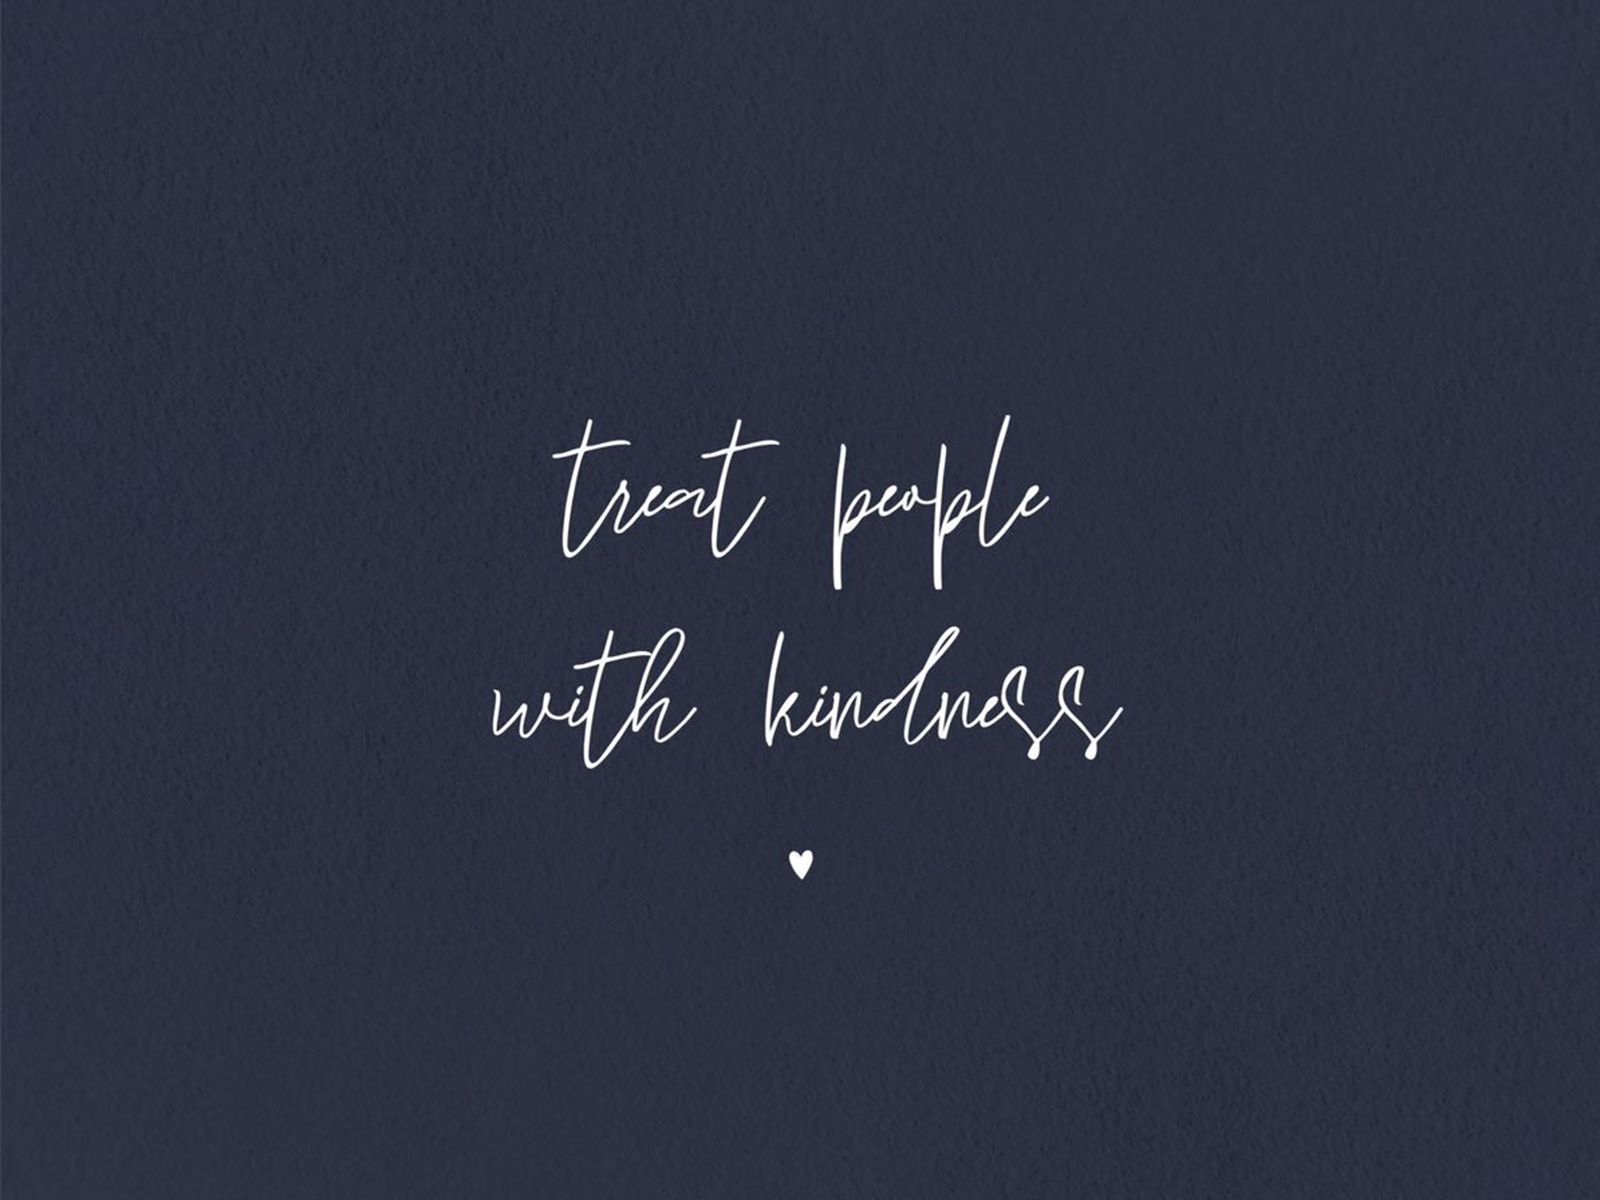 Treat People With Kindness Wallpapers